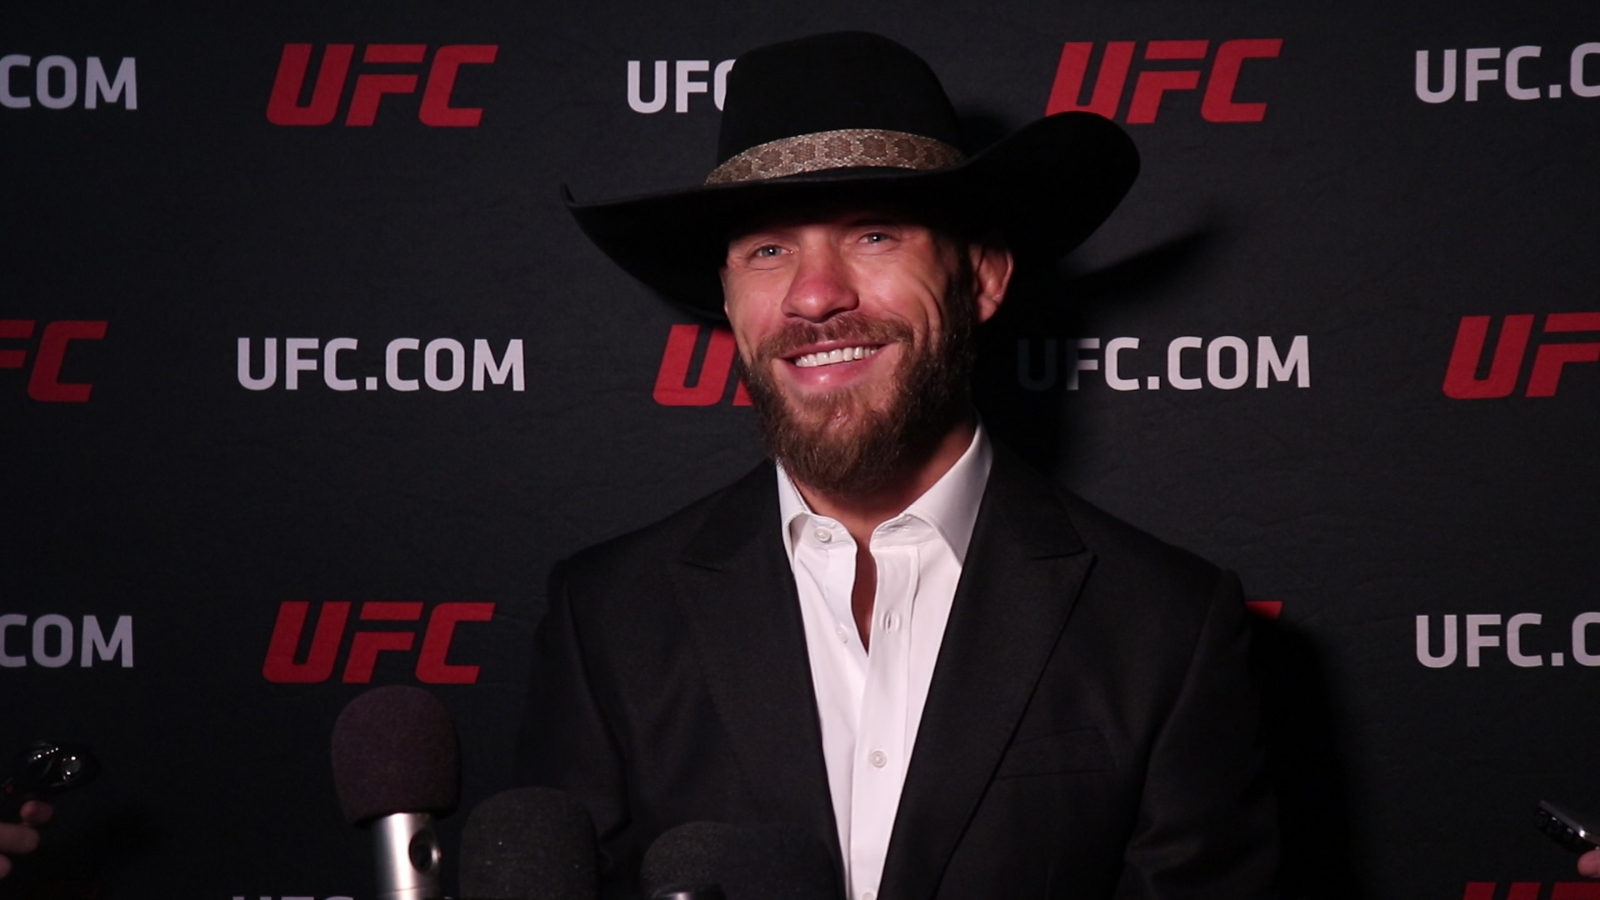 Donald Cerrone on Diego Sanchez: “He desires this to be his race into the sunset, and I wouldn’t possess any dispute giving it to him.”